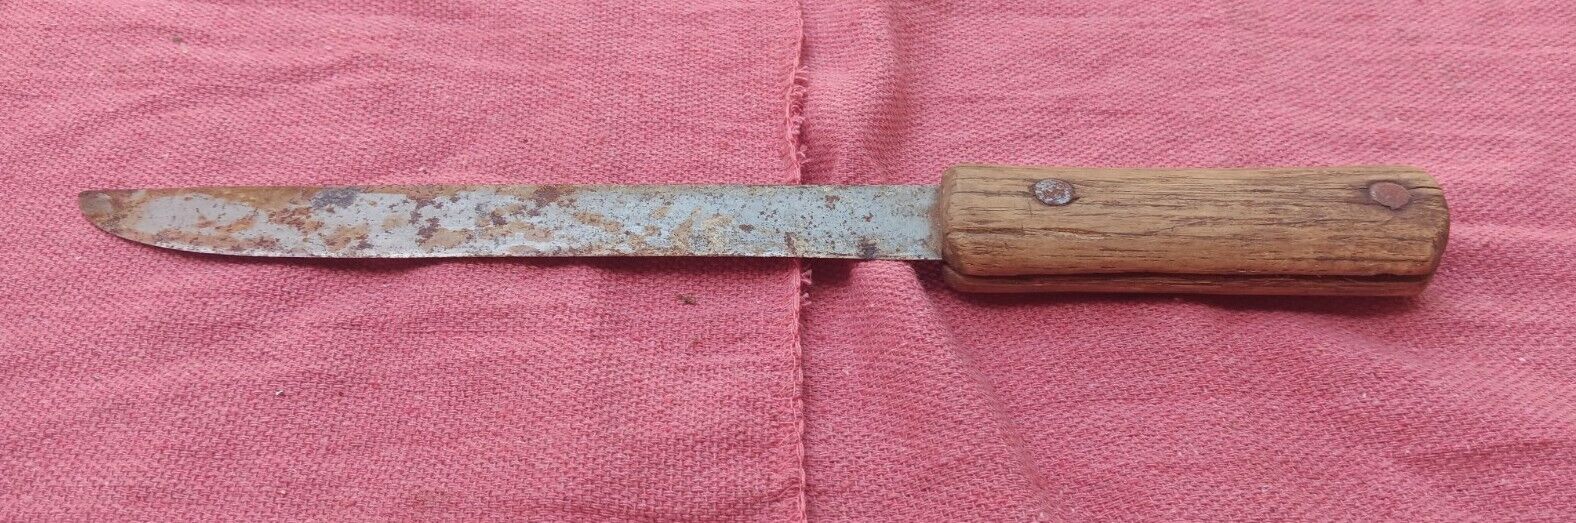 Primitive Hand Made Fixed Blade Kitchen Knife